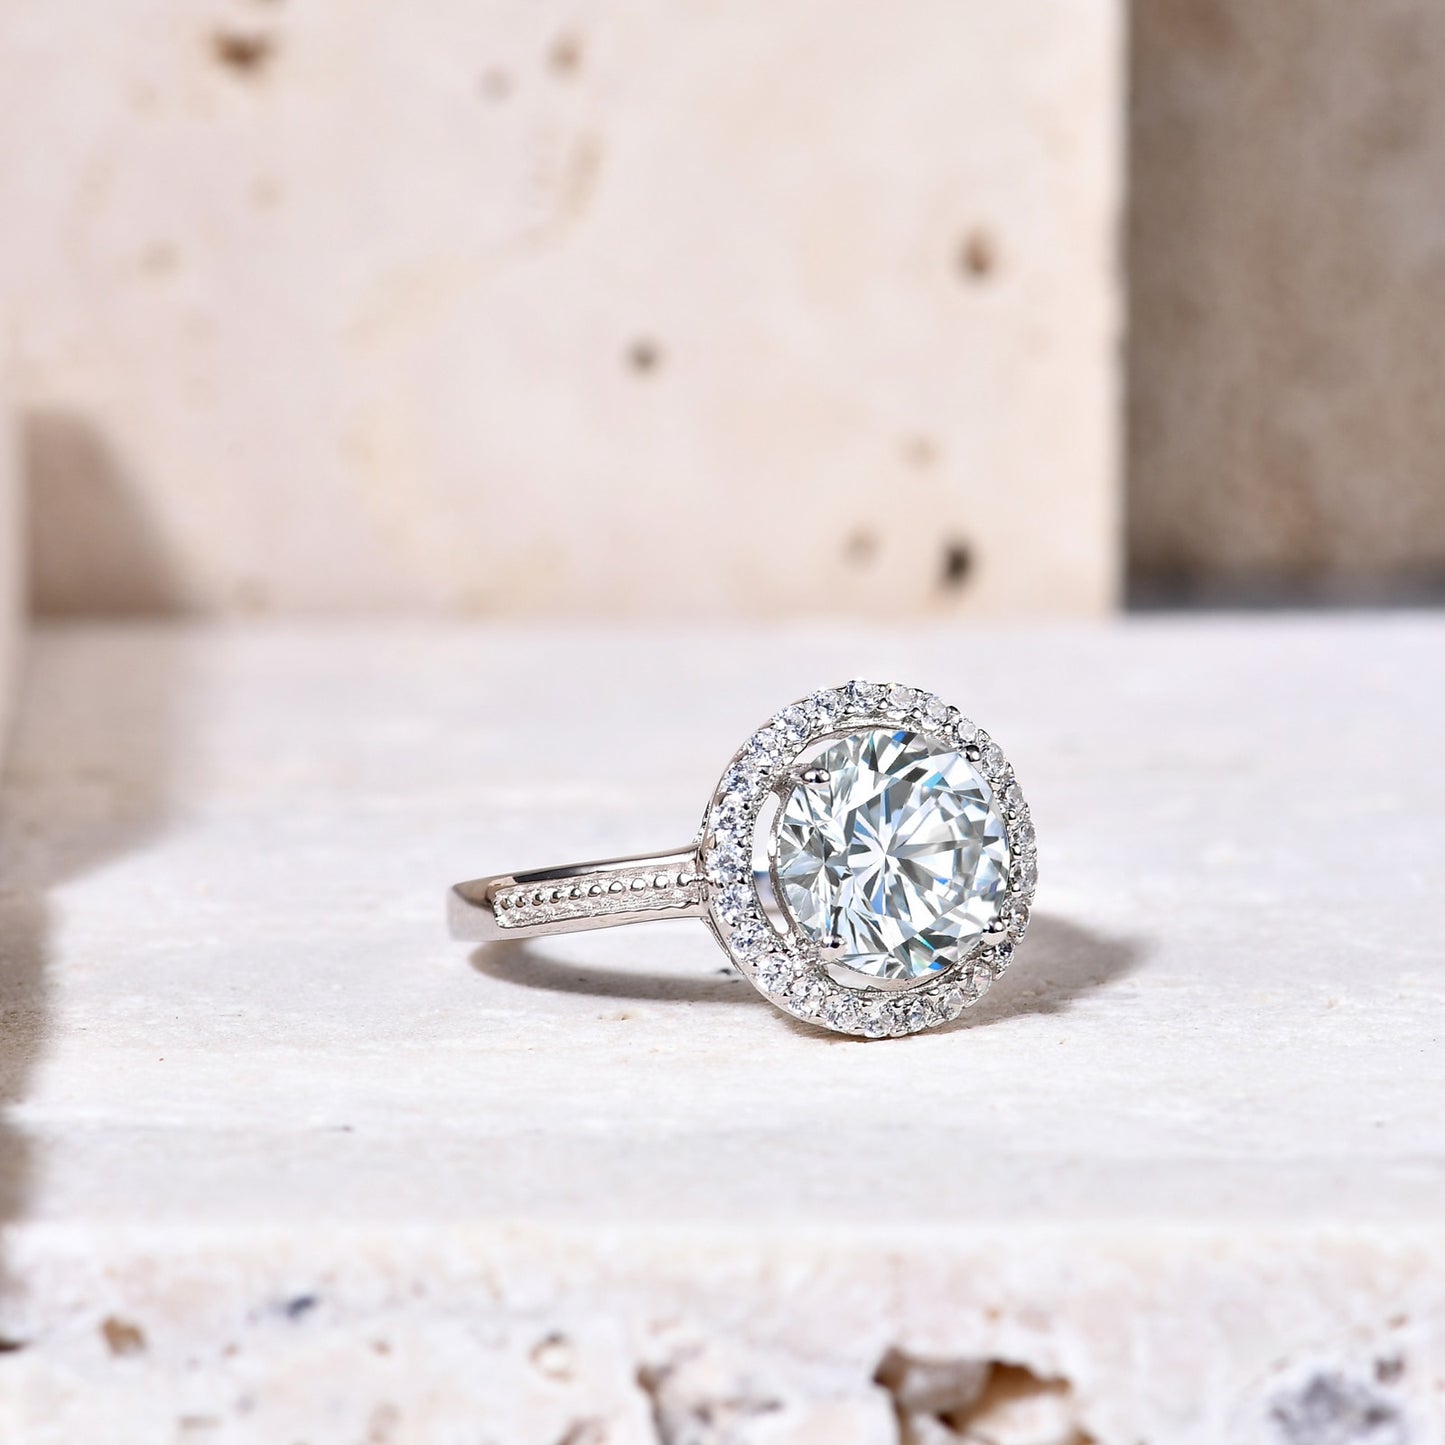 A silver halo ring set with a 2CT round moissanite encircled by a clear gem halo and set on a textured band.